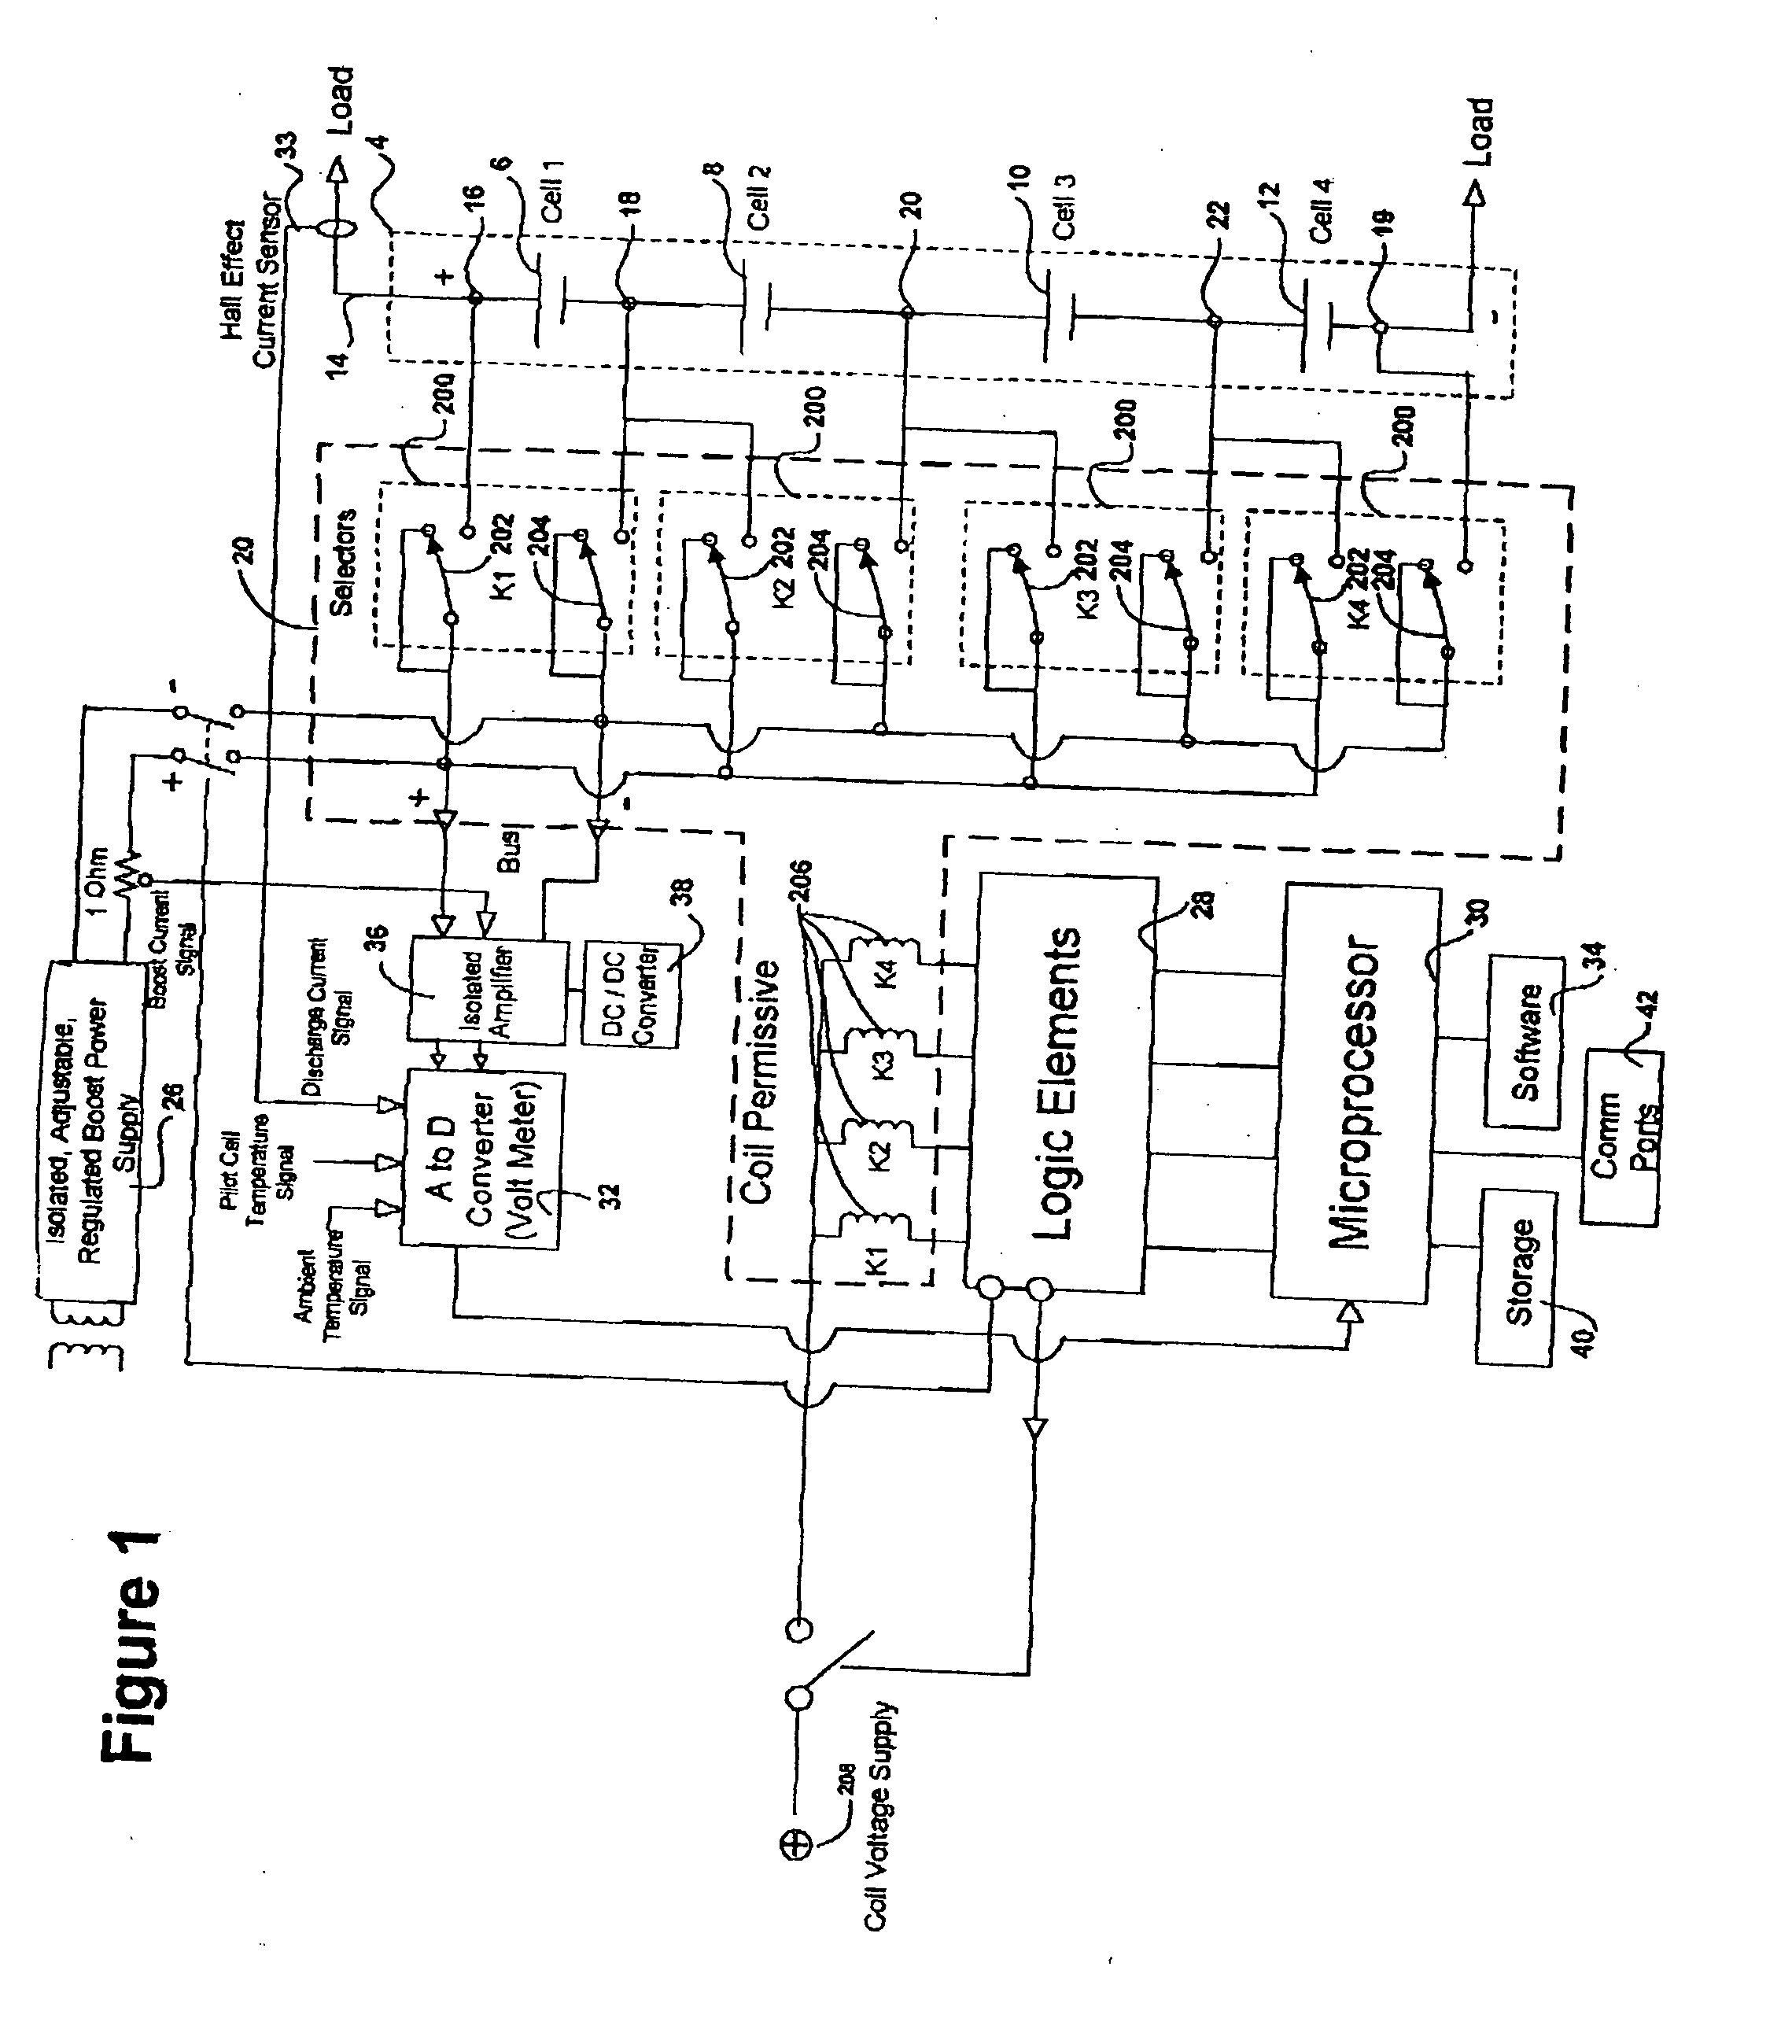 Battery management system and method